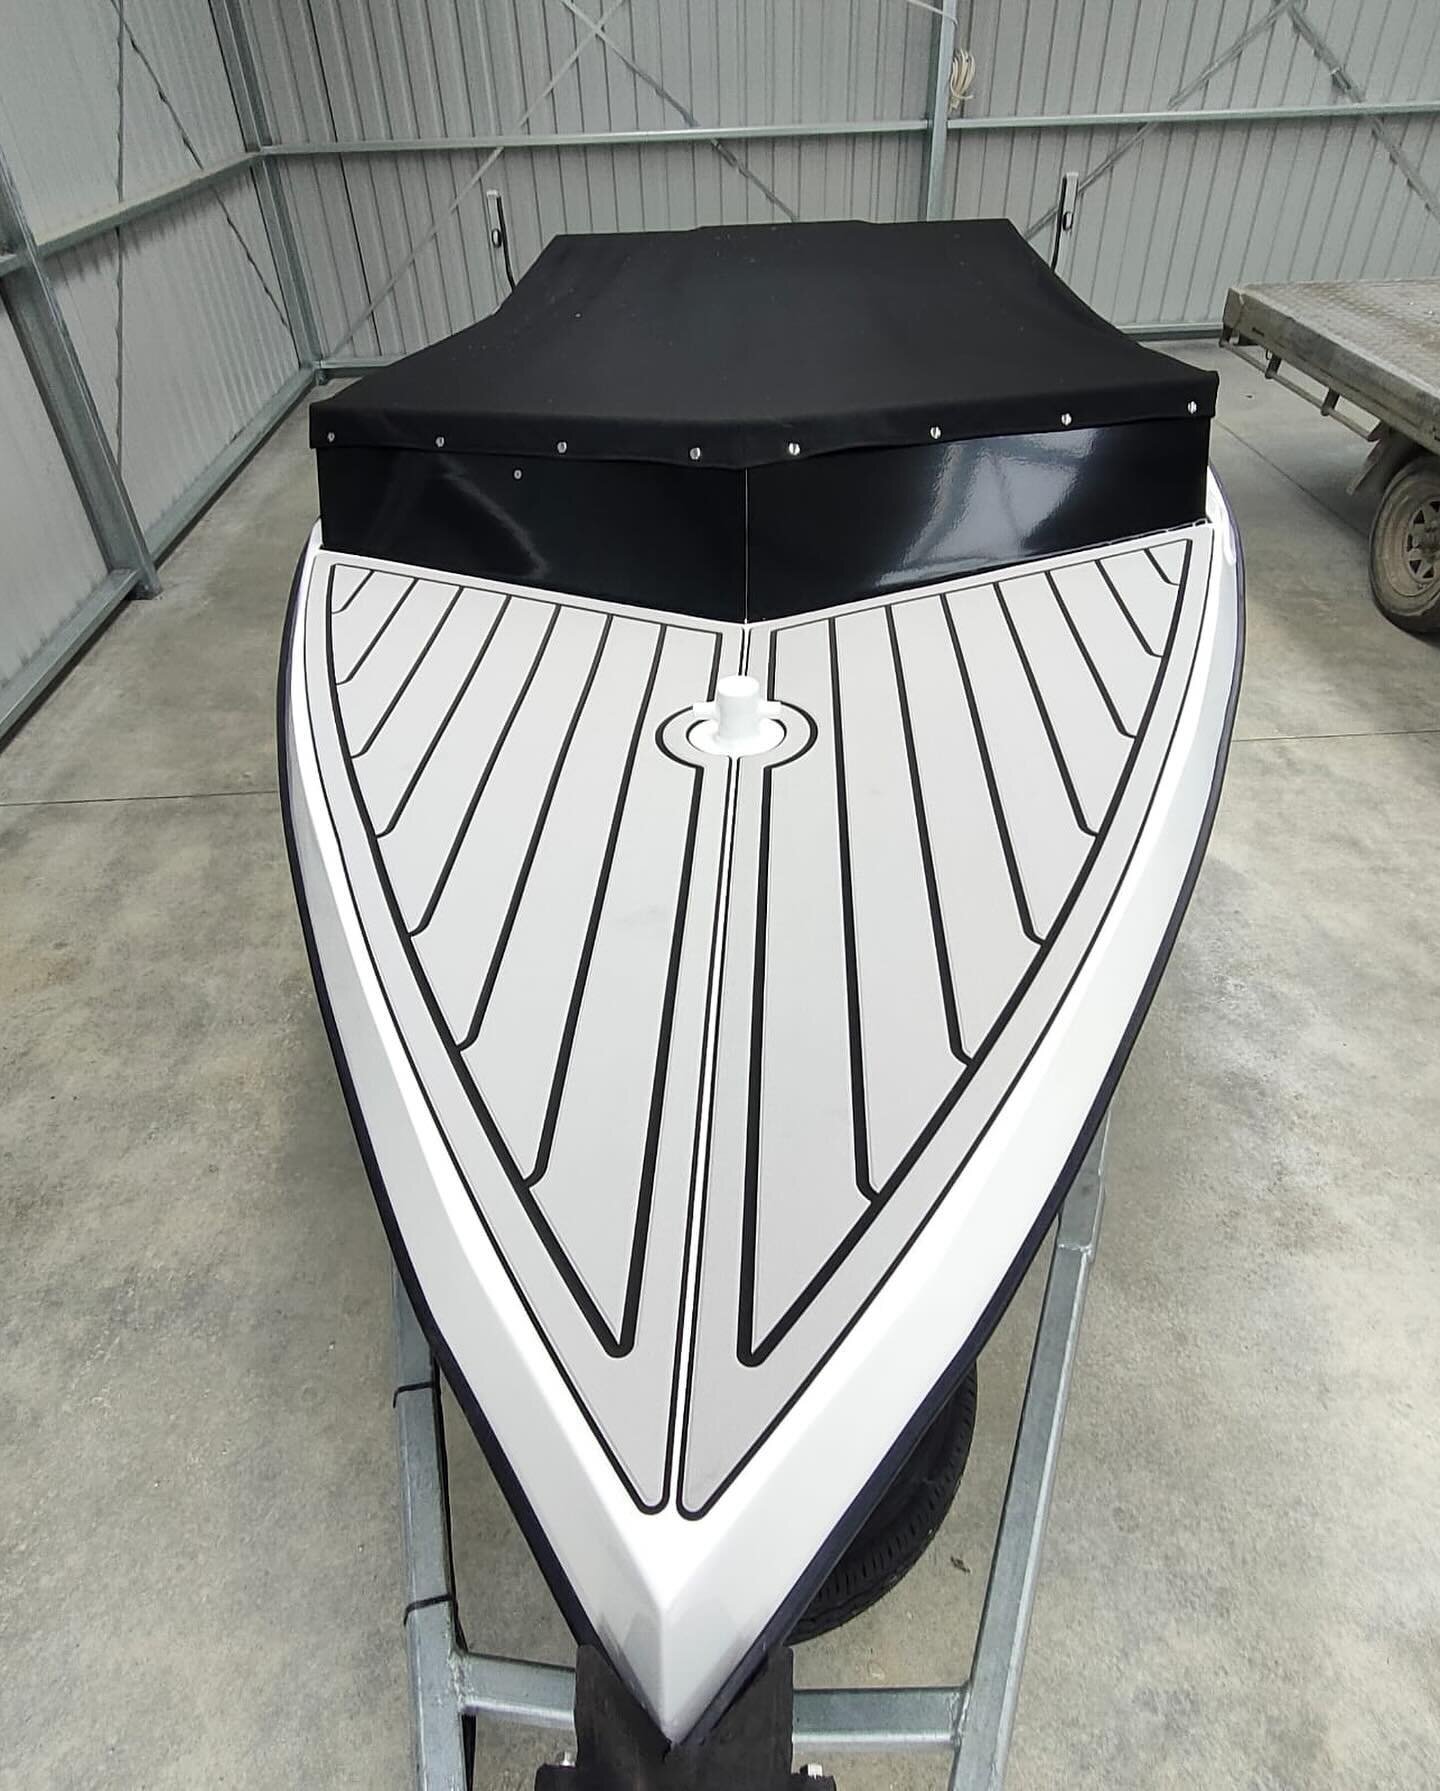 Another fun @udek_newzealand installation on this Jet boat 👌 

A stylish &amp; practical product, U-DEK is made from lightweight closed cell foam, offering a high level of comfort underfoot and excellent traction in all conditions. As well as being 